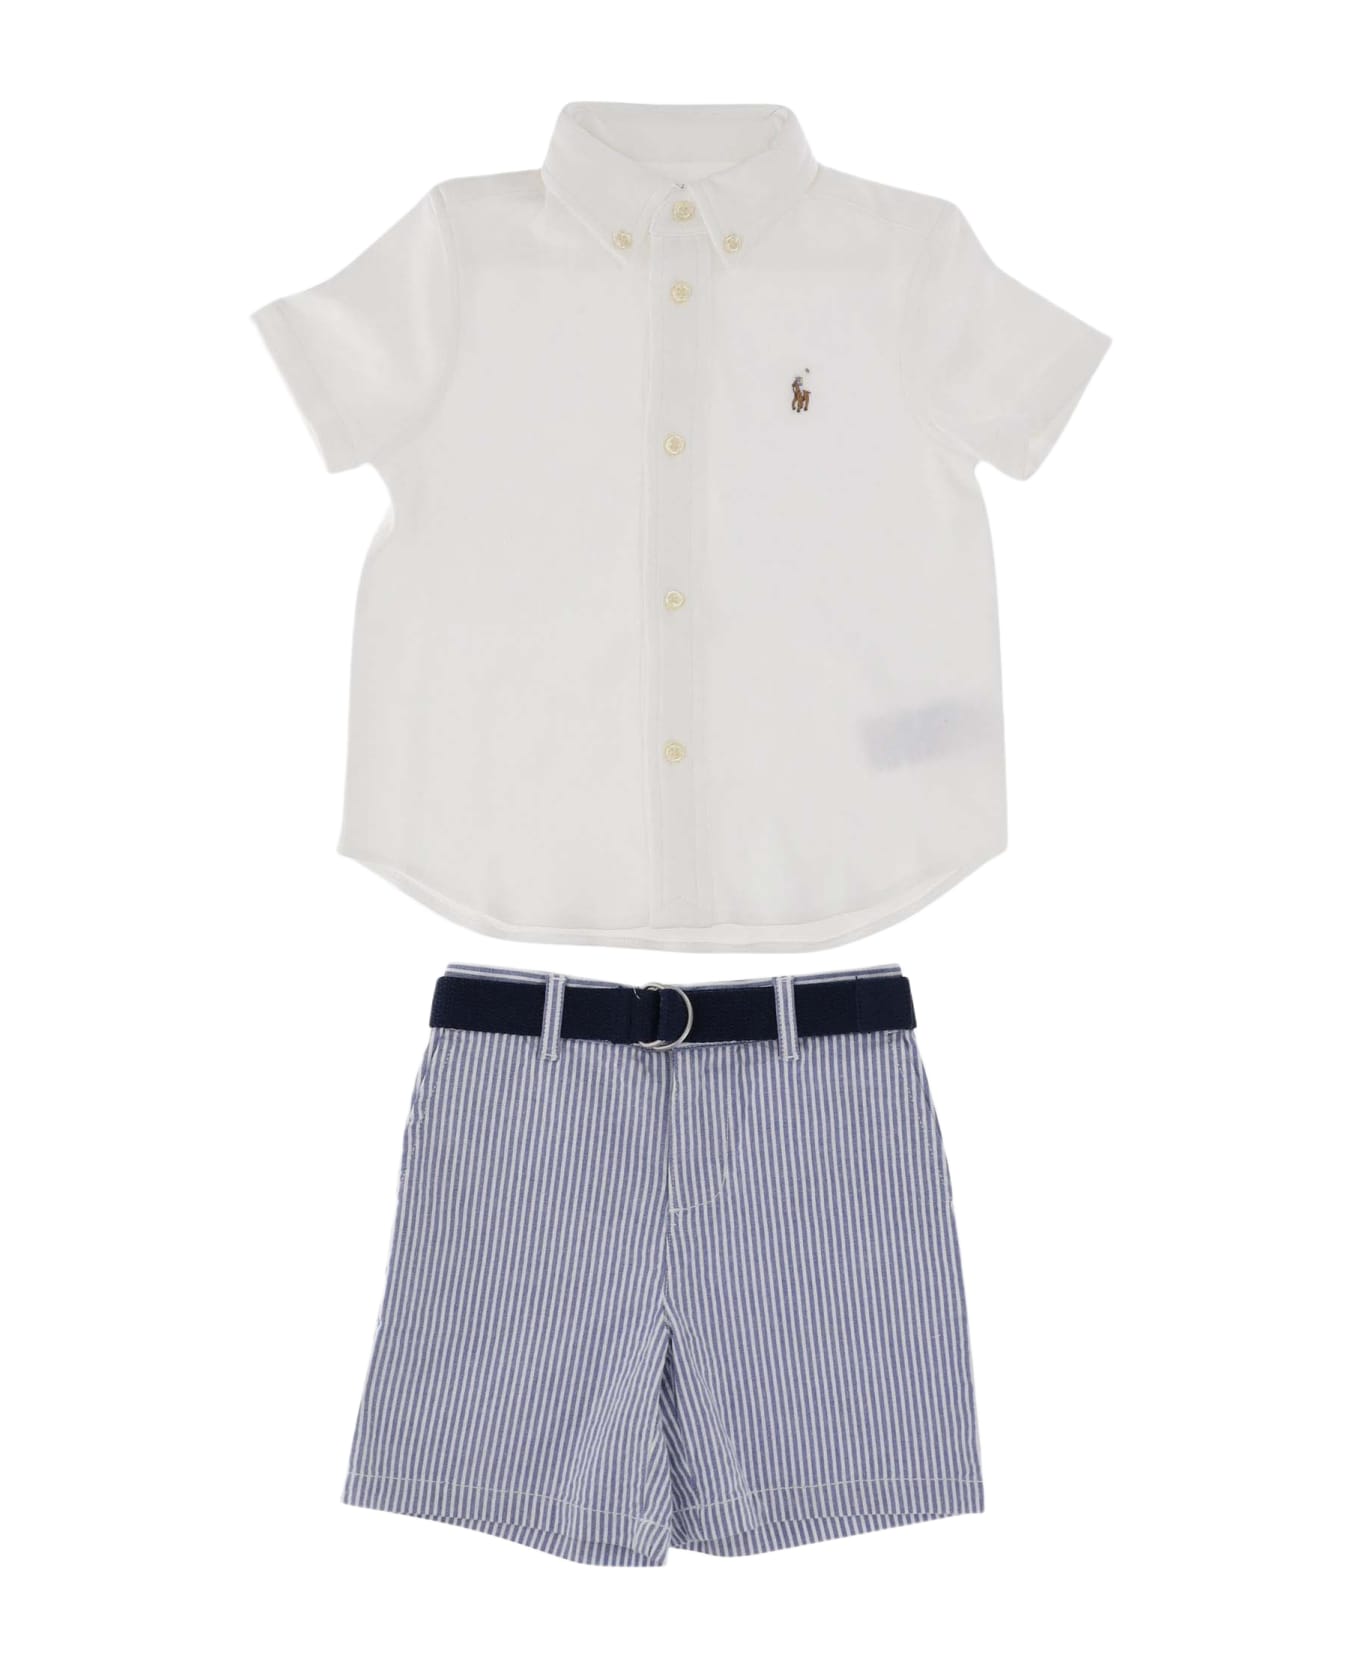 Polo Ralph Lauren Two-piece Outfit Set - Red 水着